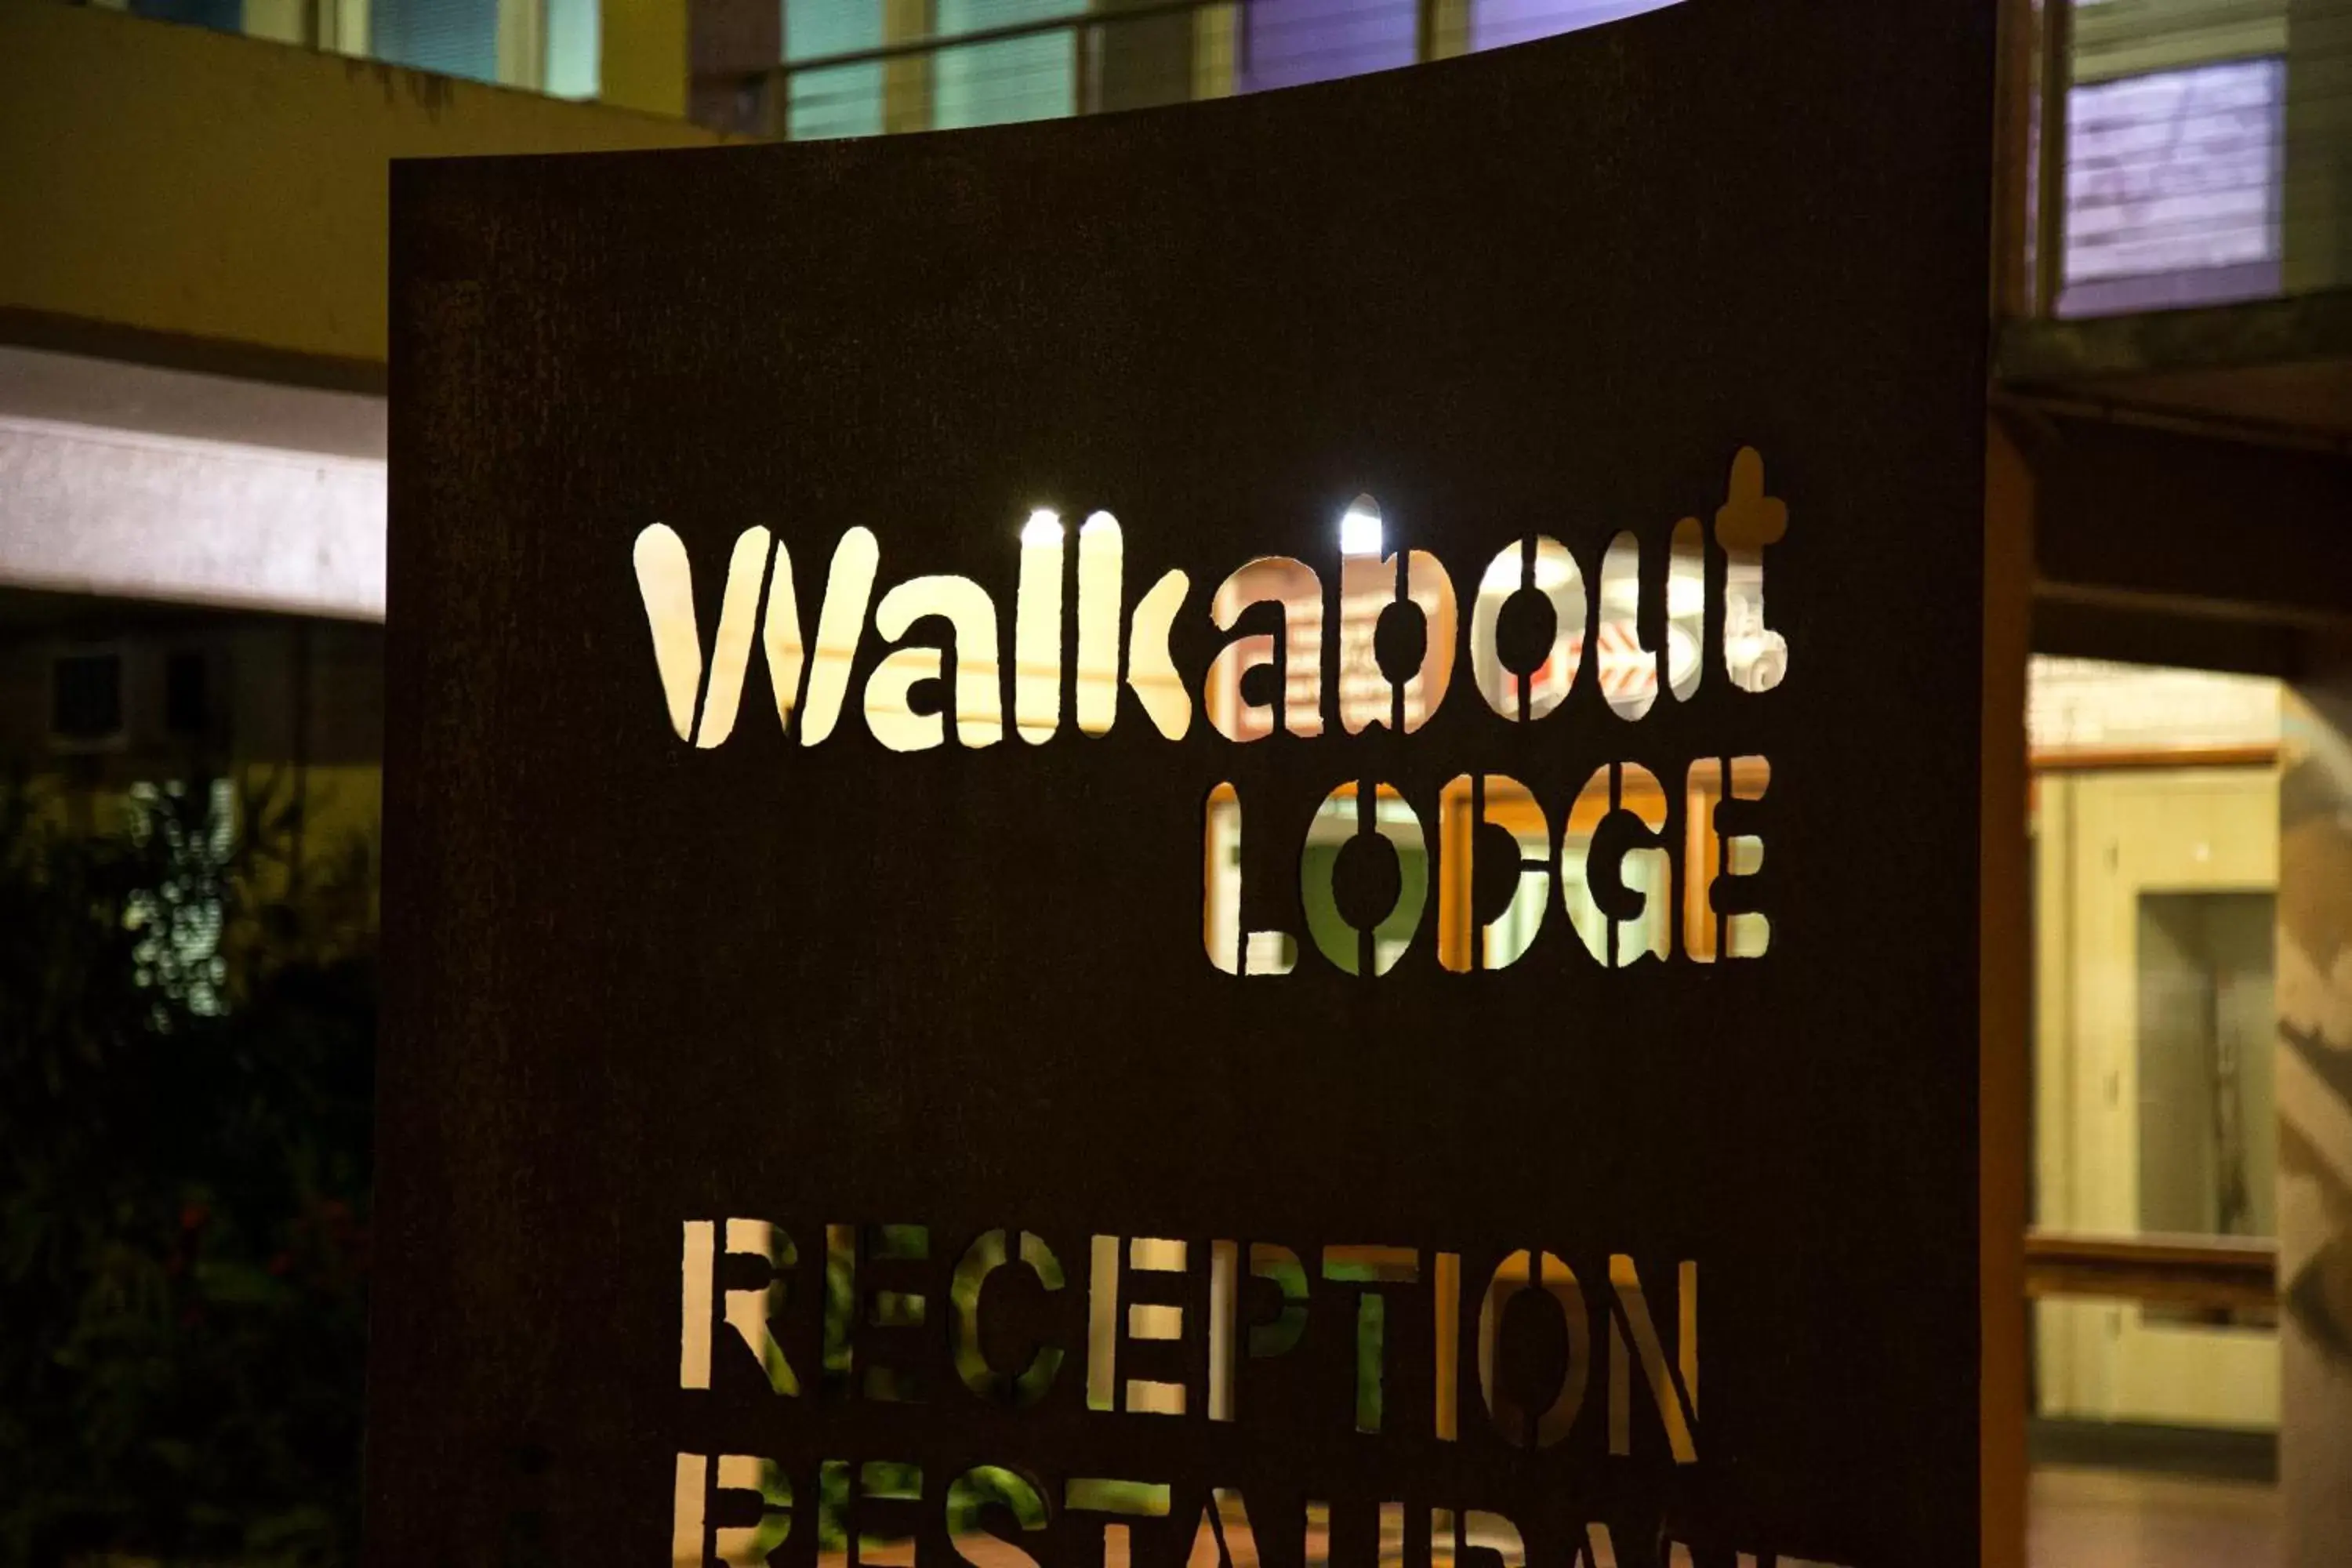 Facade/entrance in Walkabout Lodge